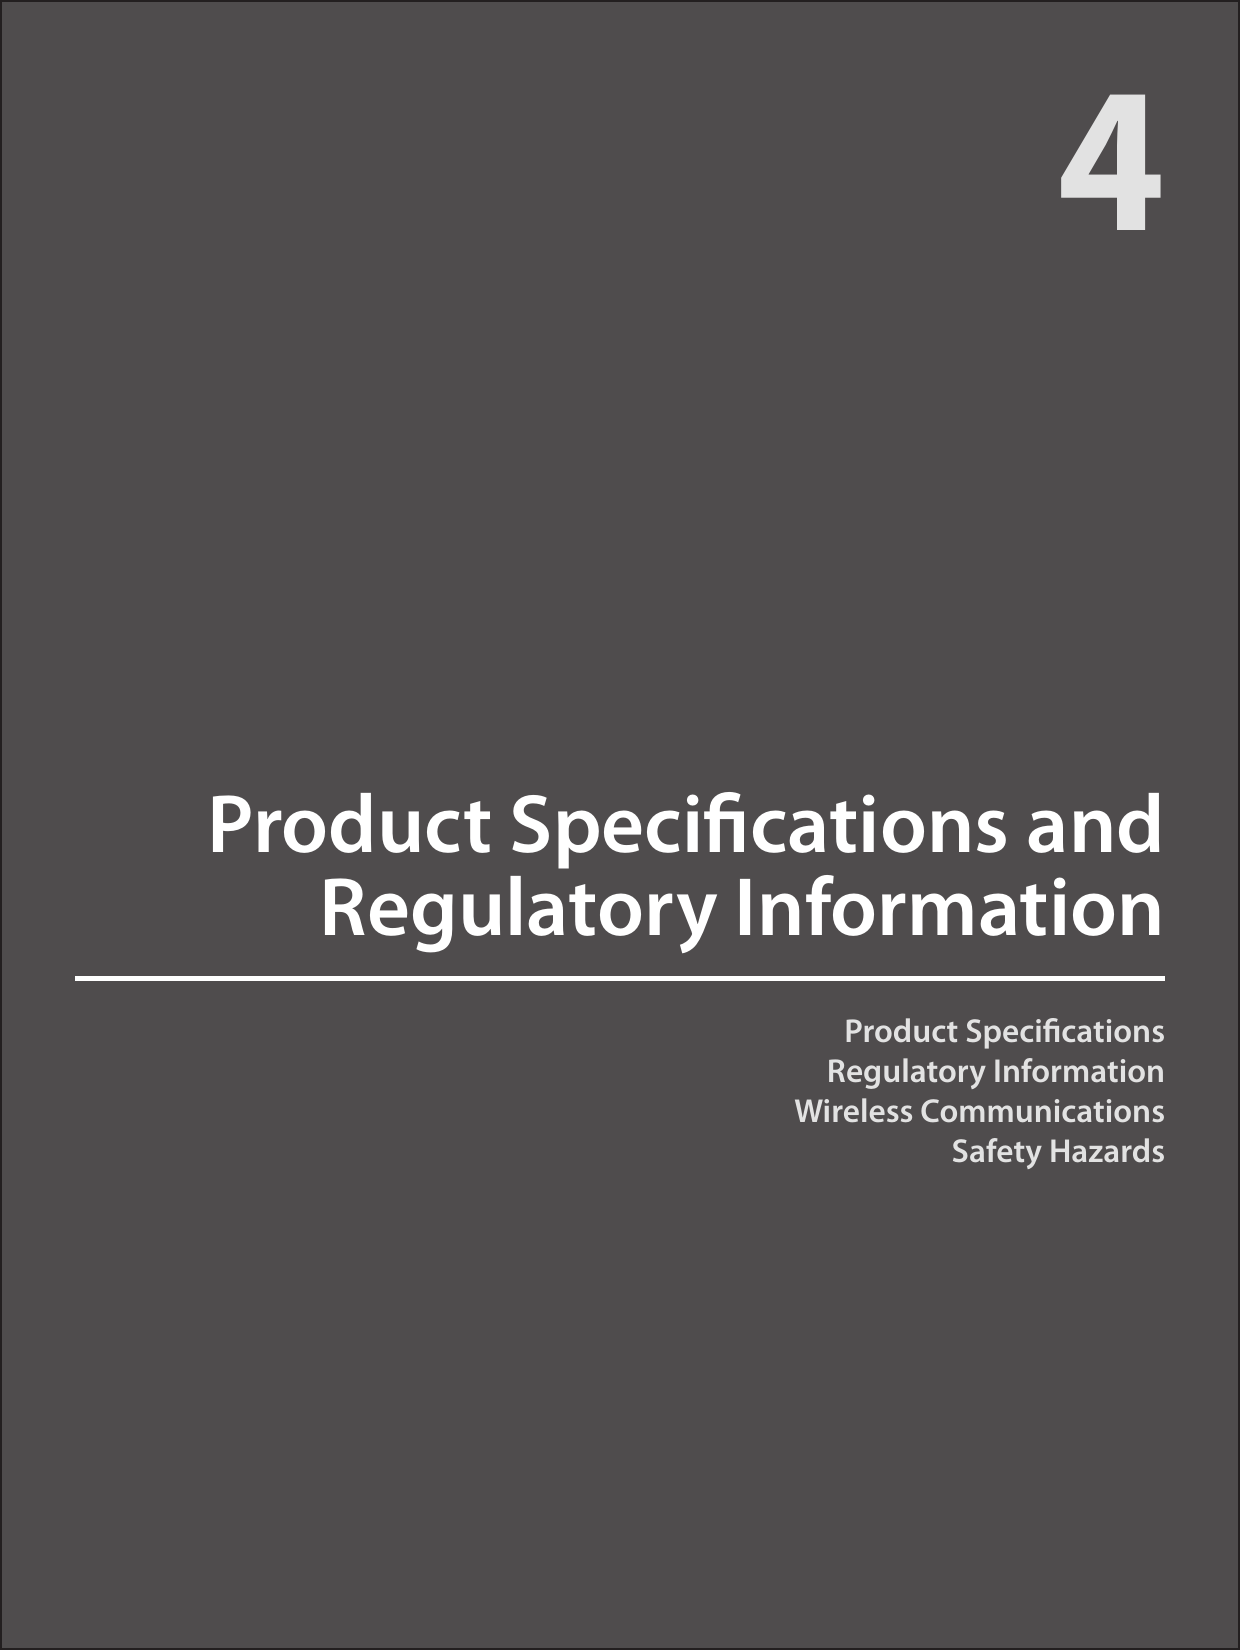 4Product Specications and Regulatory InformationProduct SpecicationsRegulatory InformationWireless CommunicationsSafety Hazards